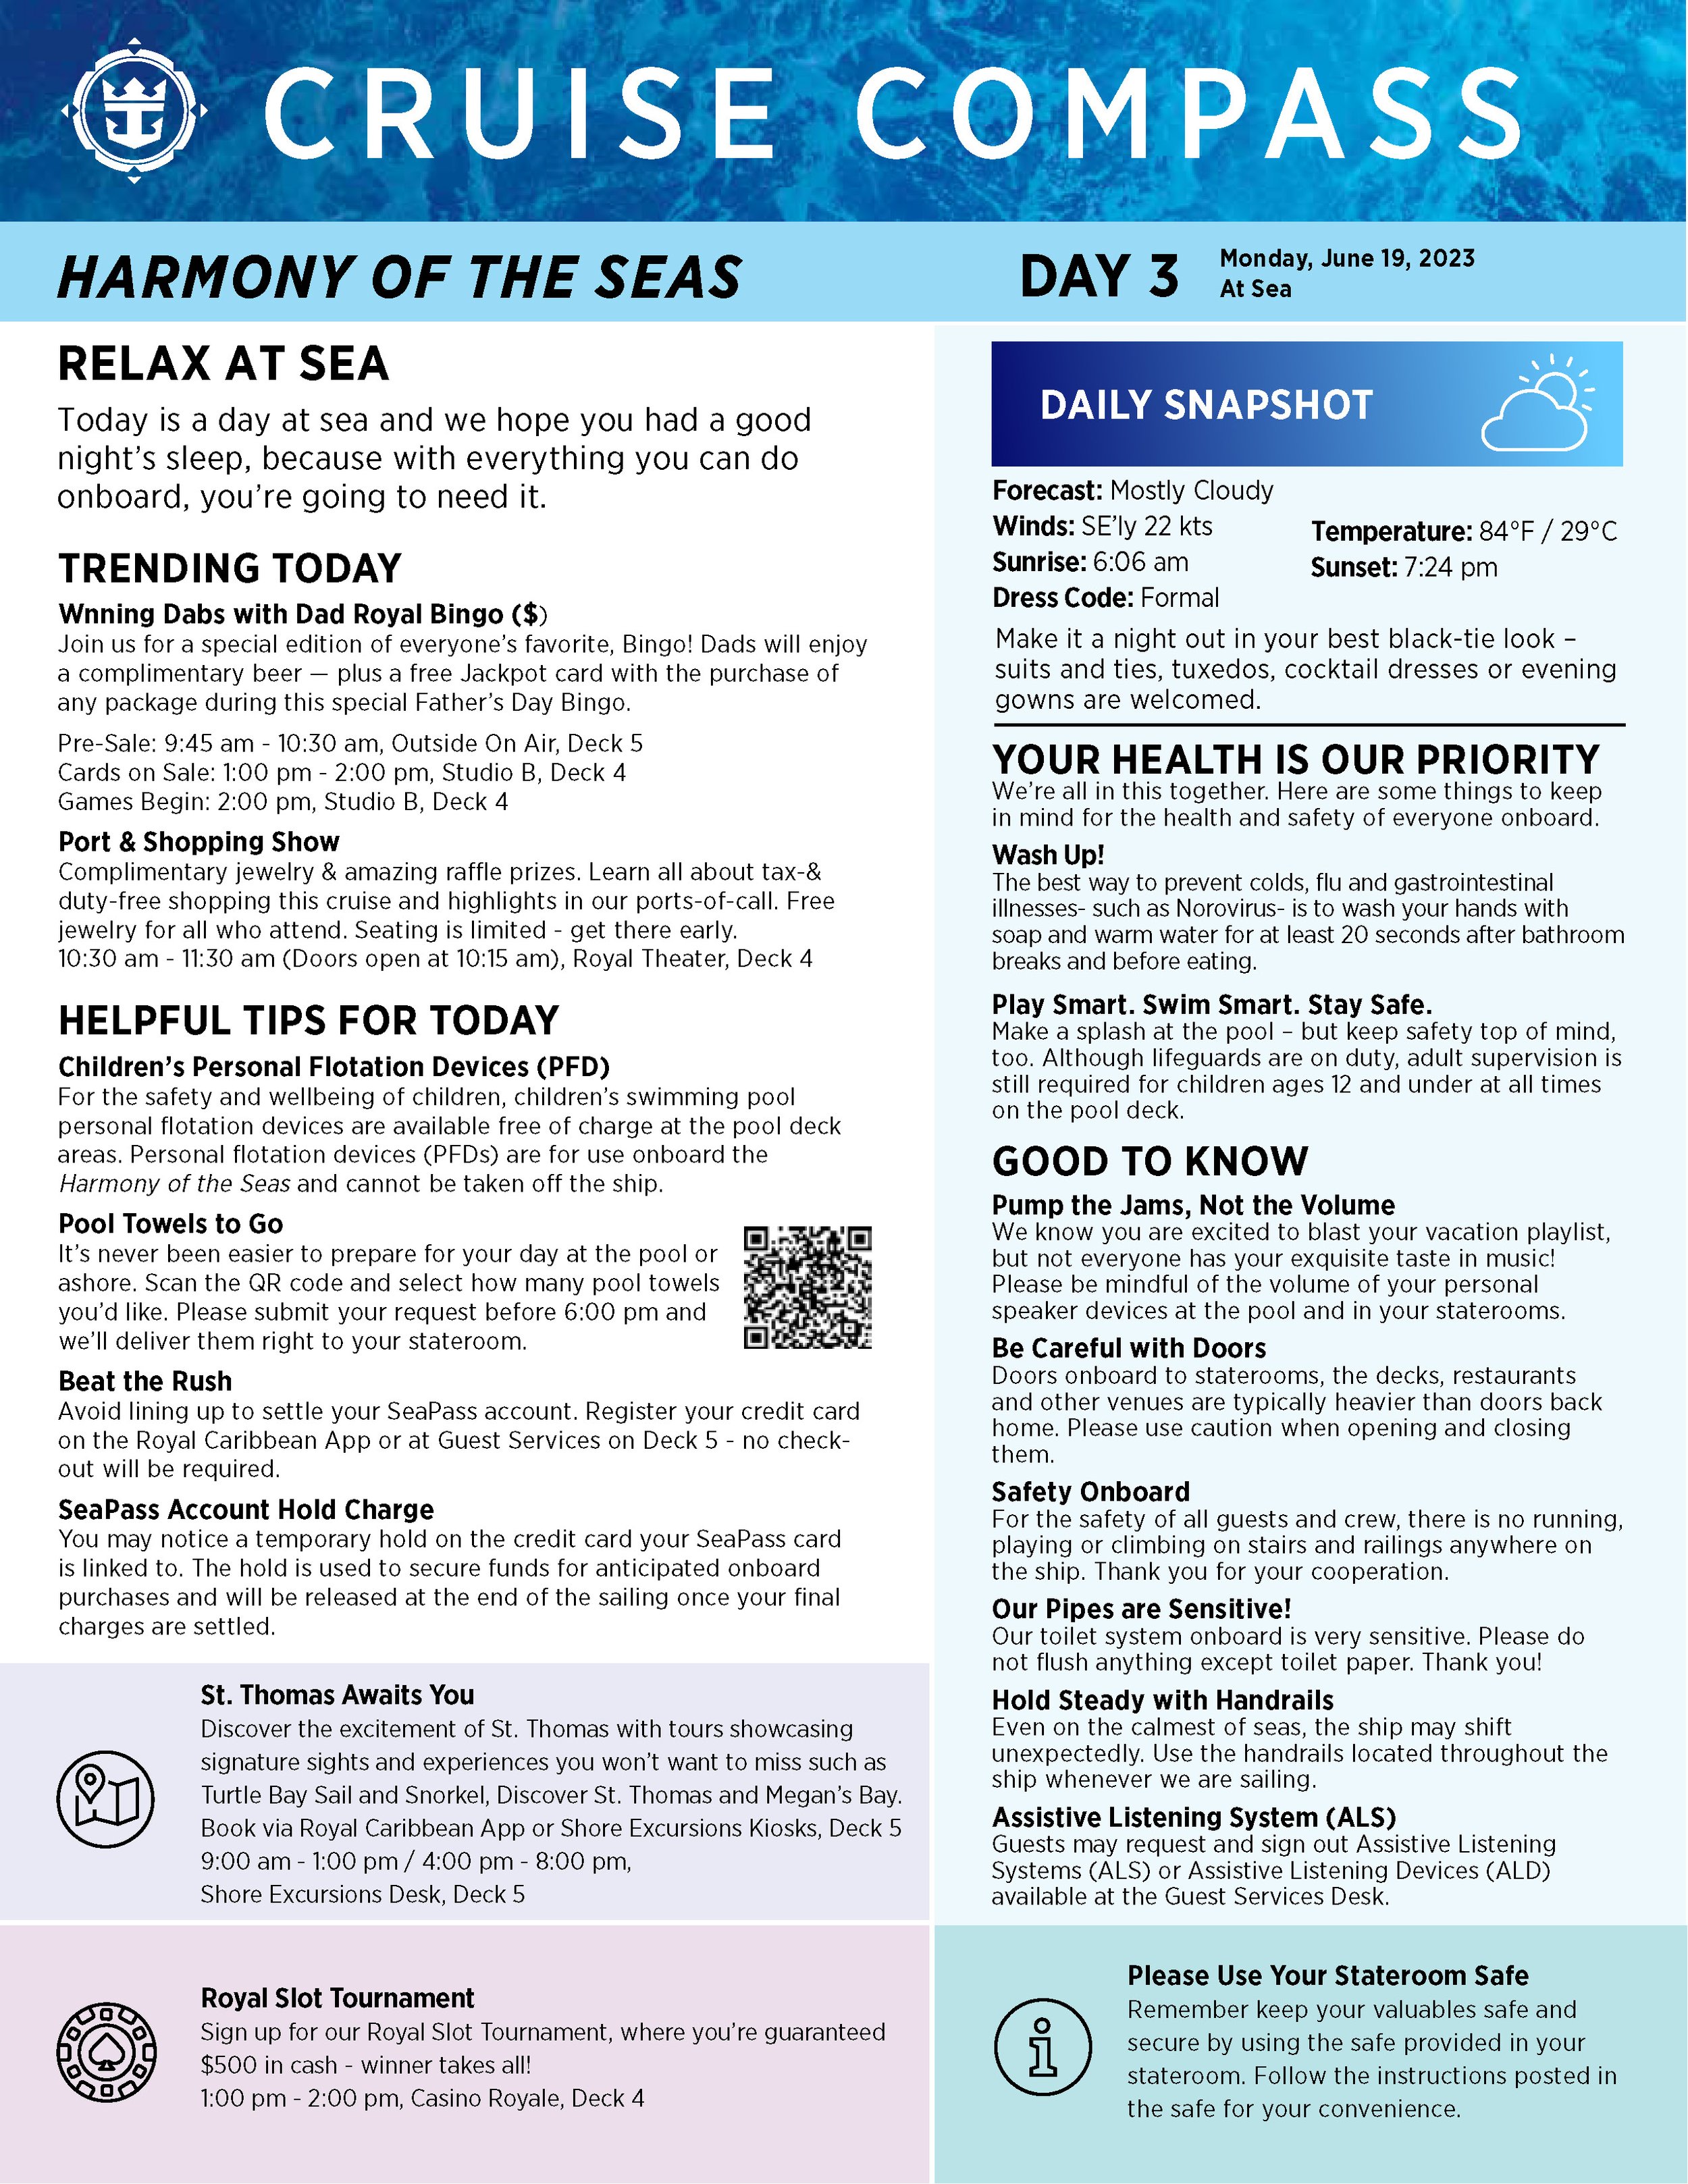 Harmony_of_the_Seas - Day 03 - at sea - June 19 - Page 01.jpg